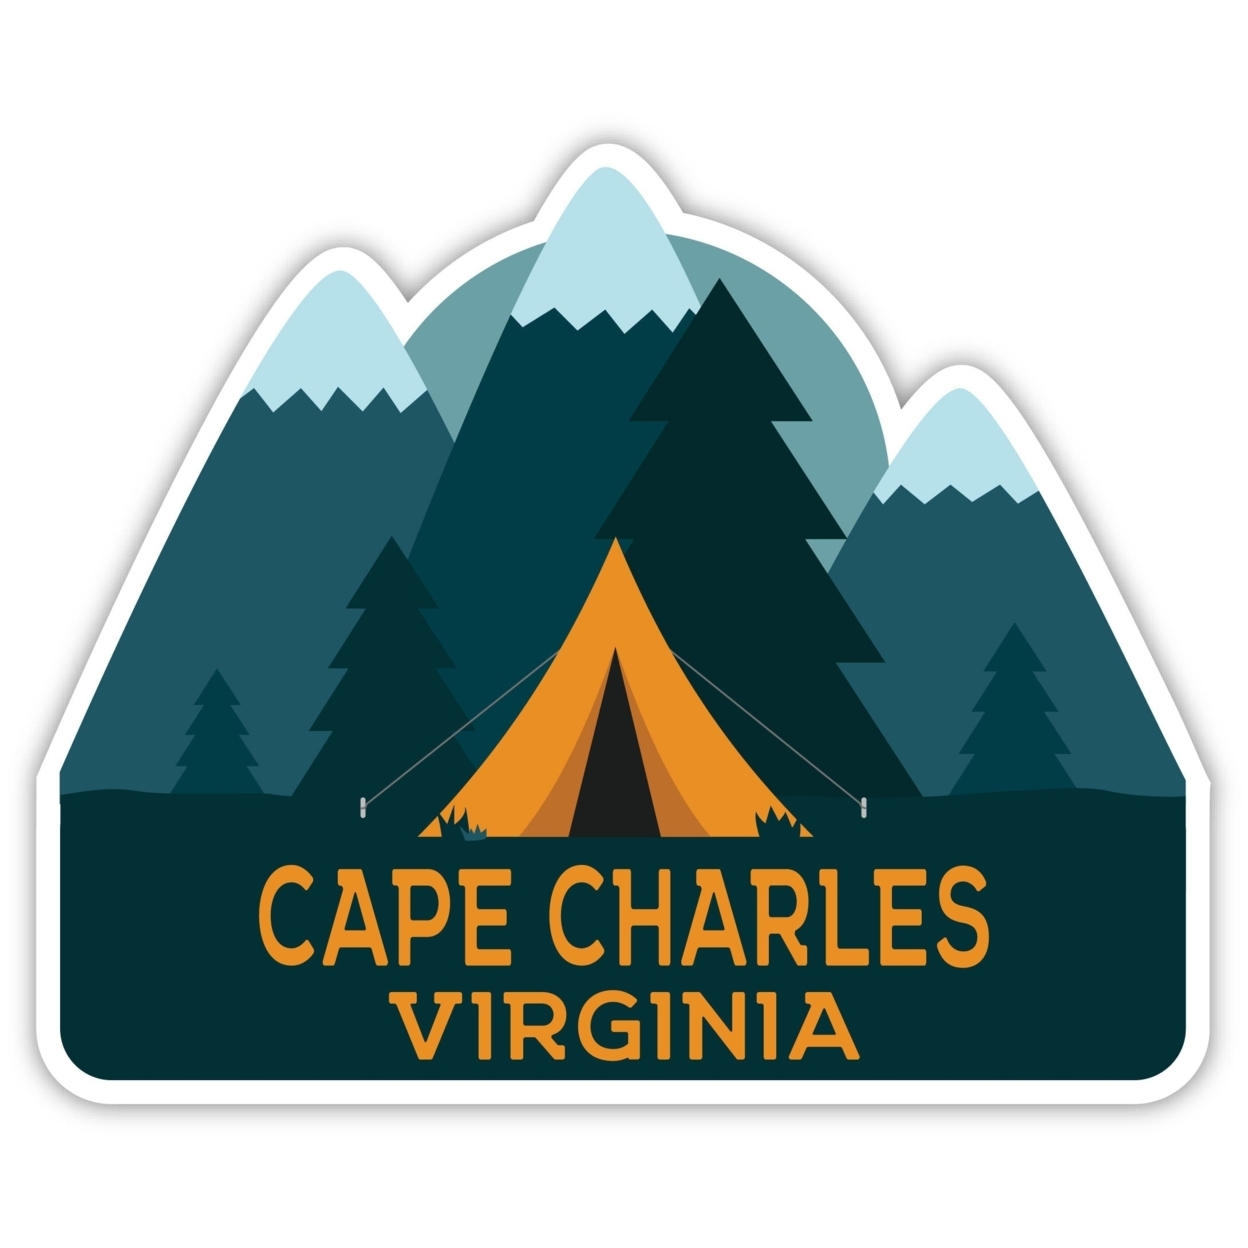 Cape Charles Virginia Souvenir Decorative Stickers (Choose Theme And Size) - 4-Pack, 8-Inch, Tent